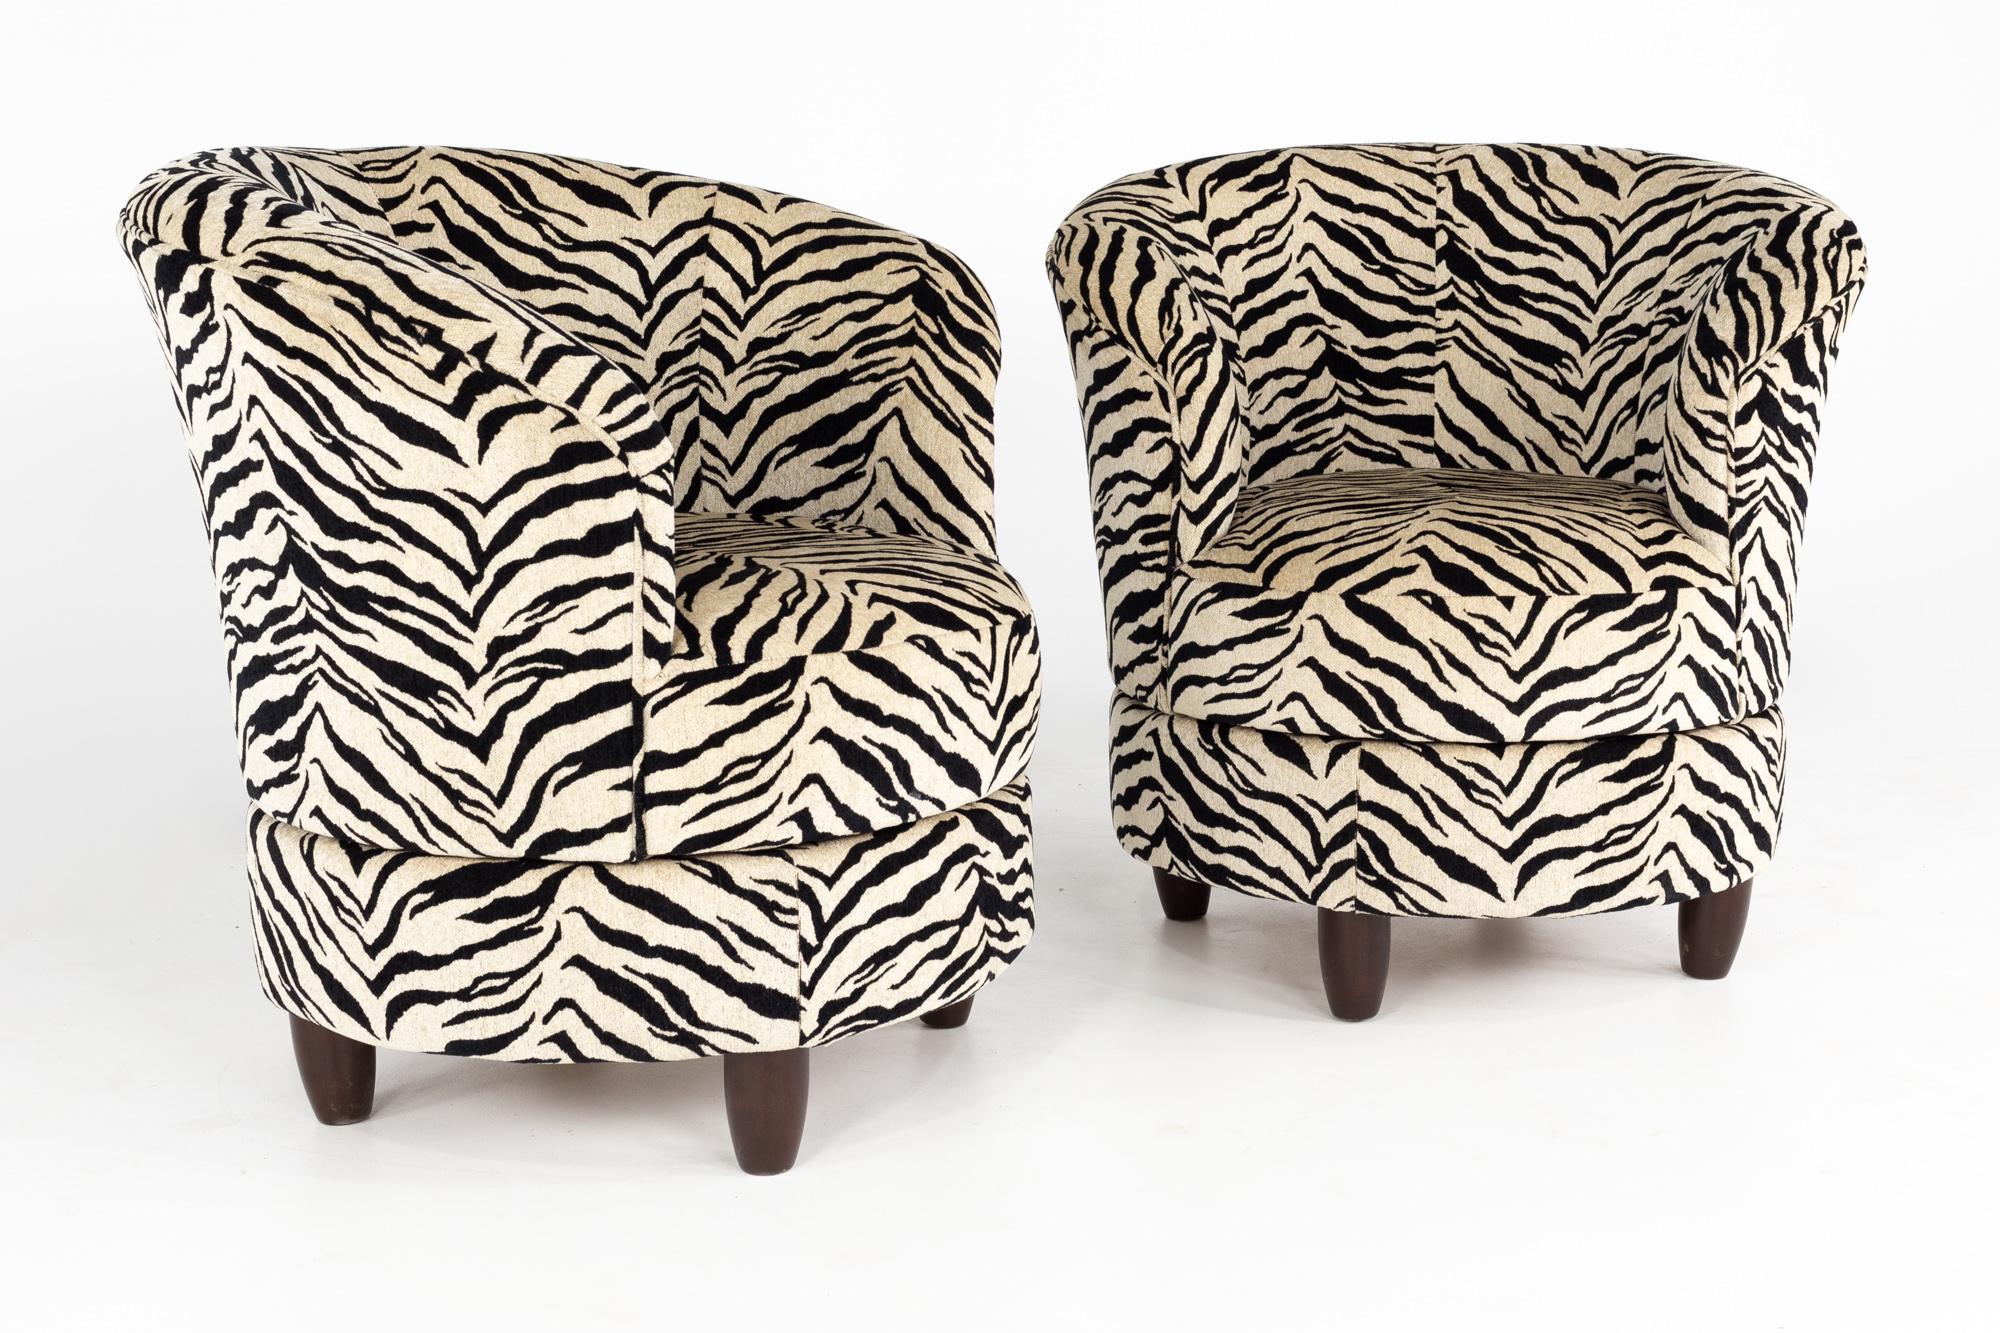 Contemporary striped swivel barrel chairs - pair

Each chair measures: 33 wide x 32 deep x 33 inches high, with a seat height of 17.5 and arm height of 29 inches

About Photos: We take our photos in a controlled lighting studio to show as much